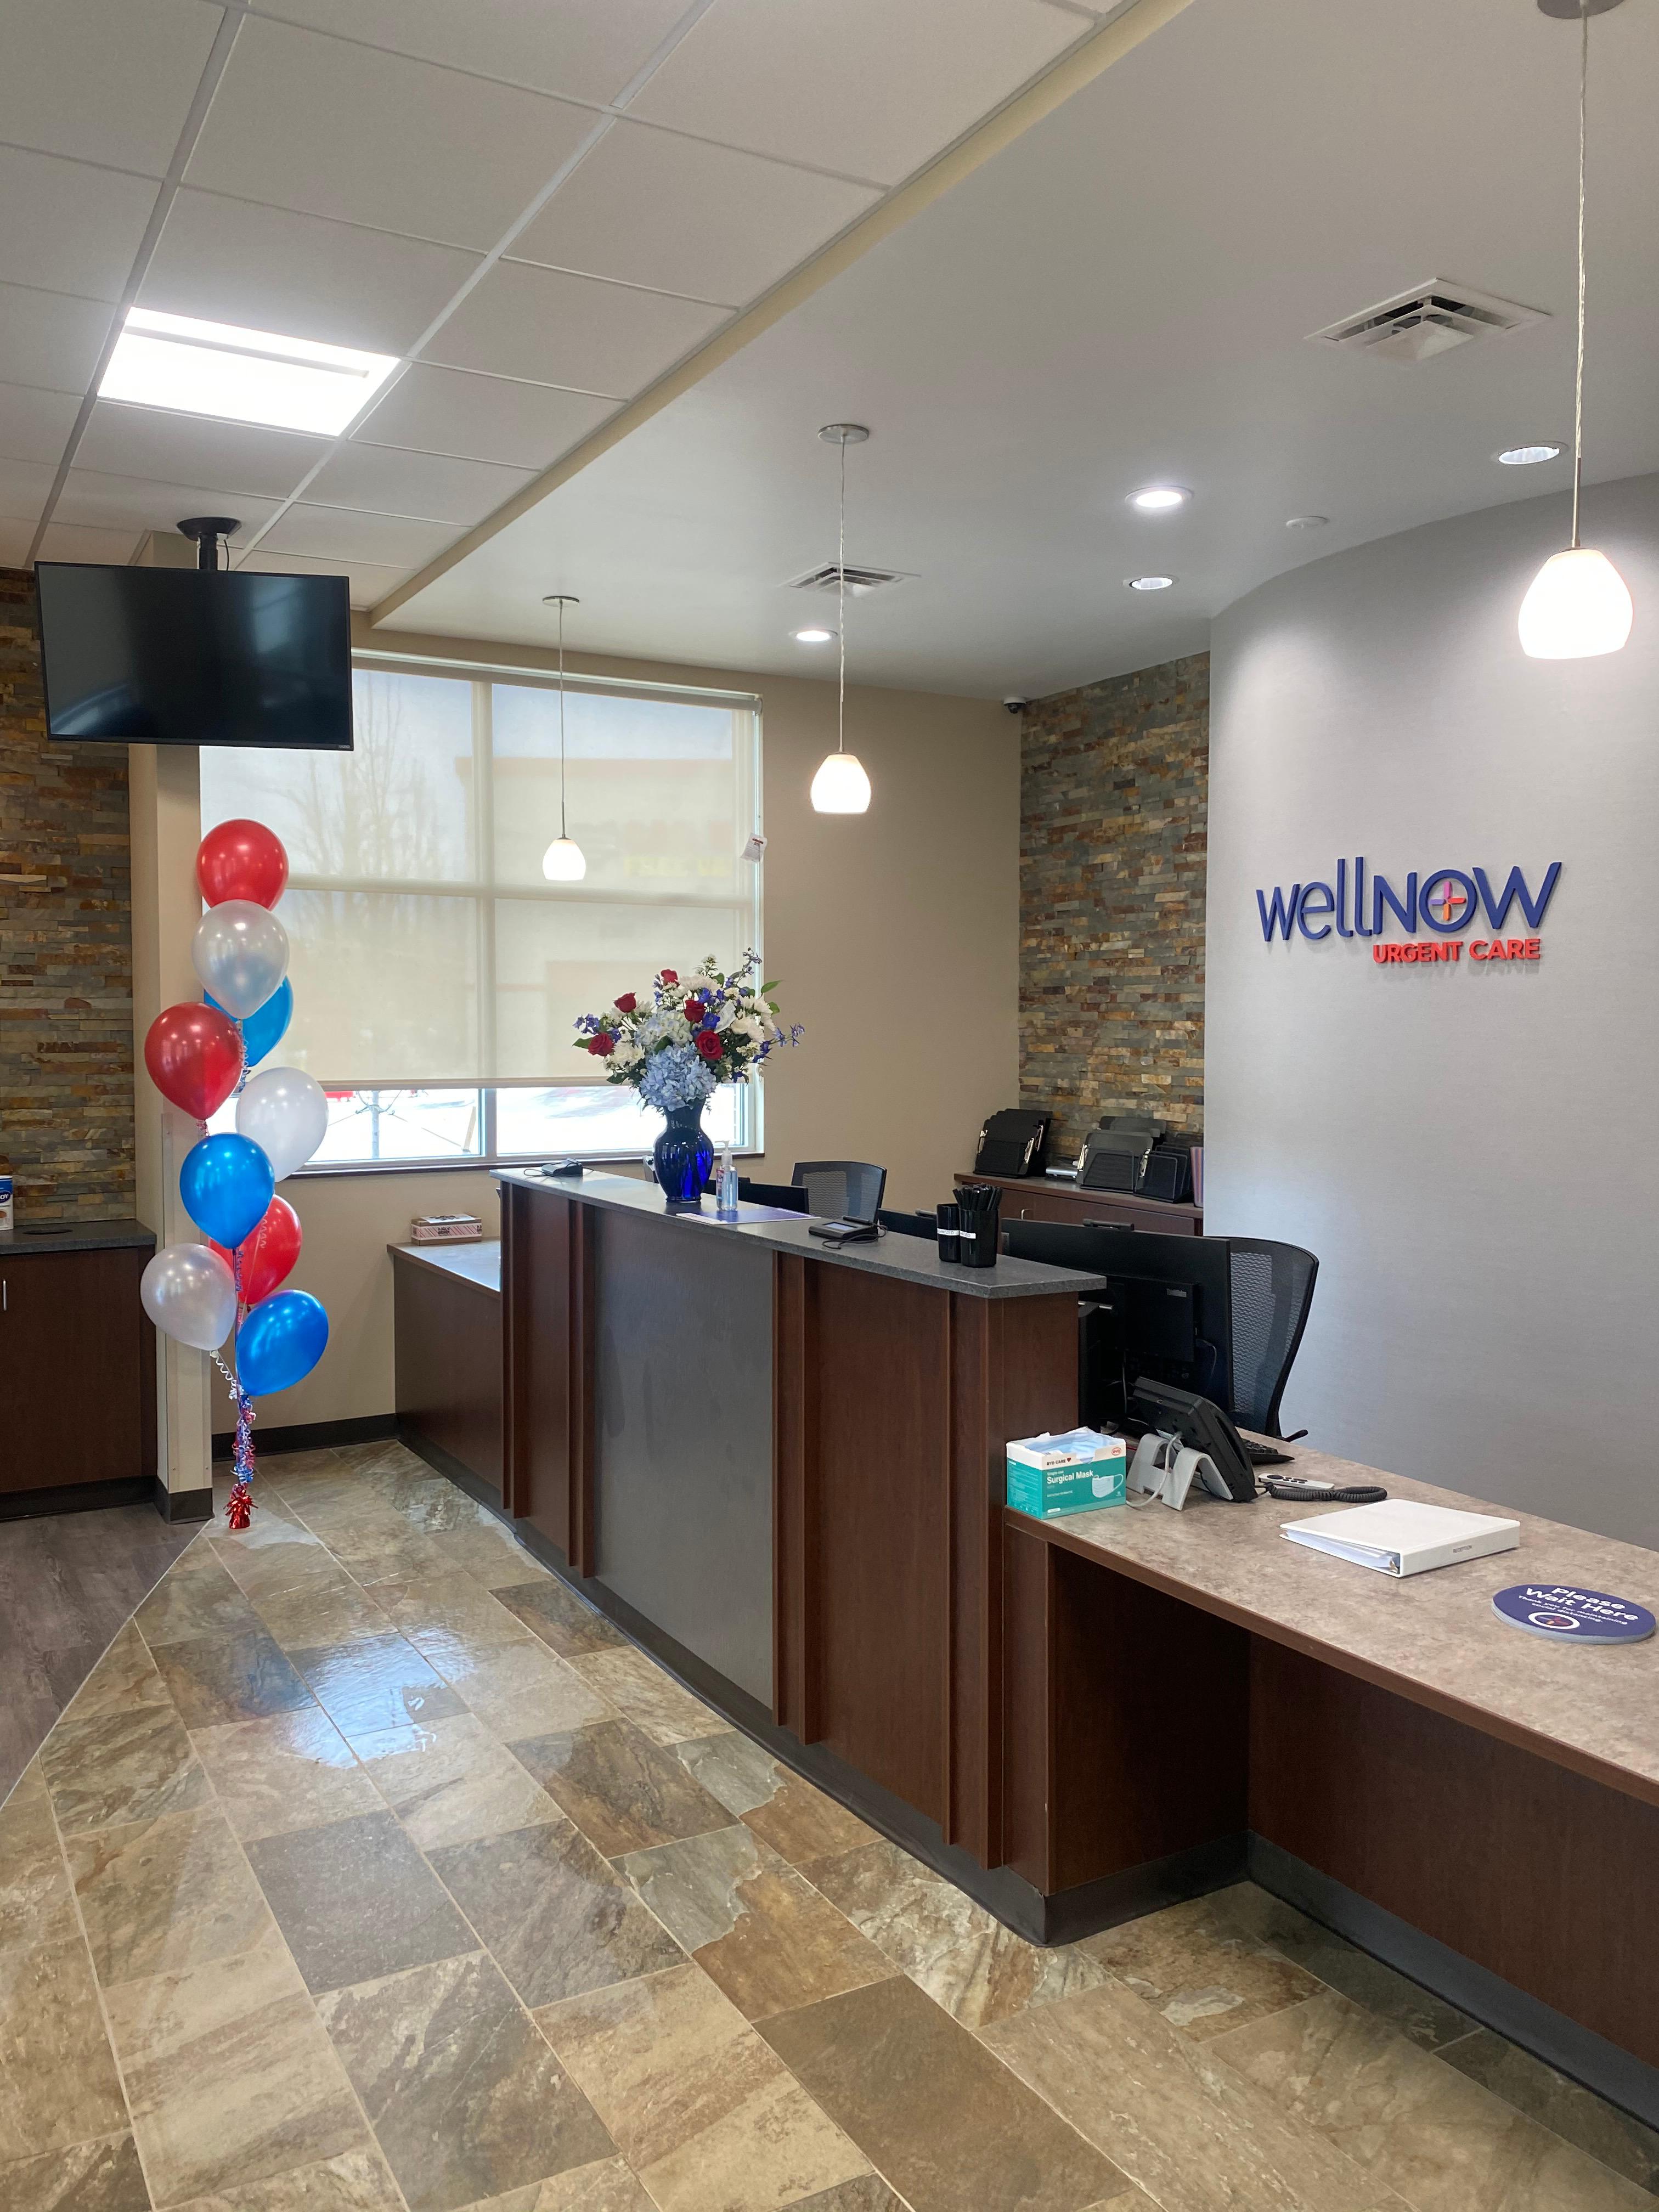 WellNow Urgent Care center provides immediate walk-in treatment for illnesses and injuries, wellness exams, and employer health services.